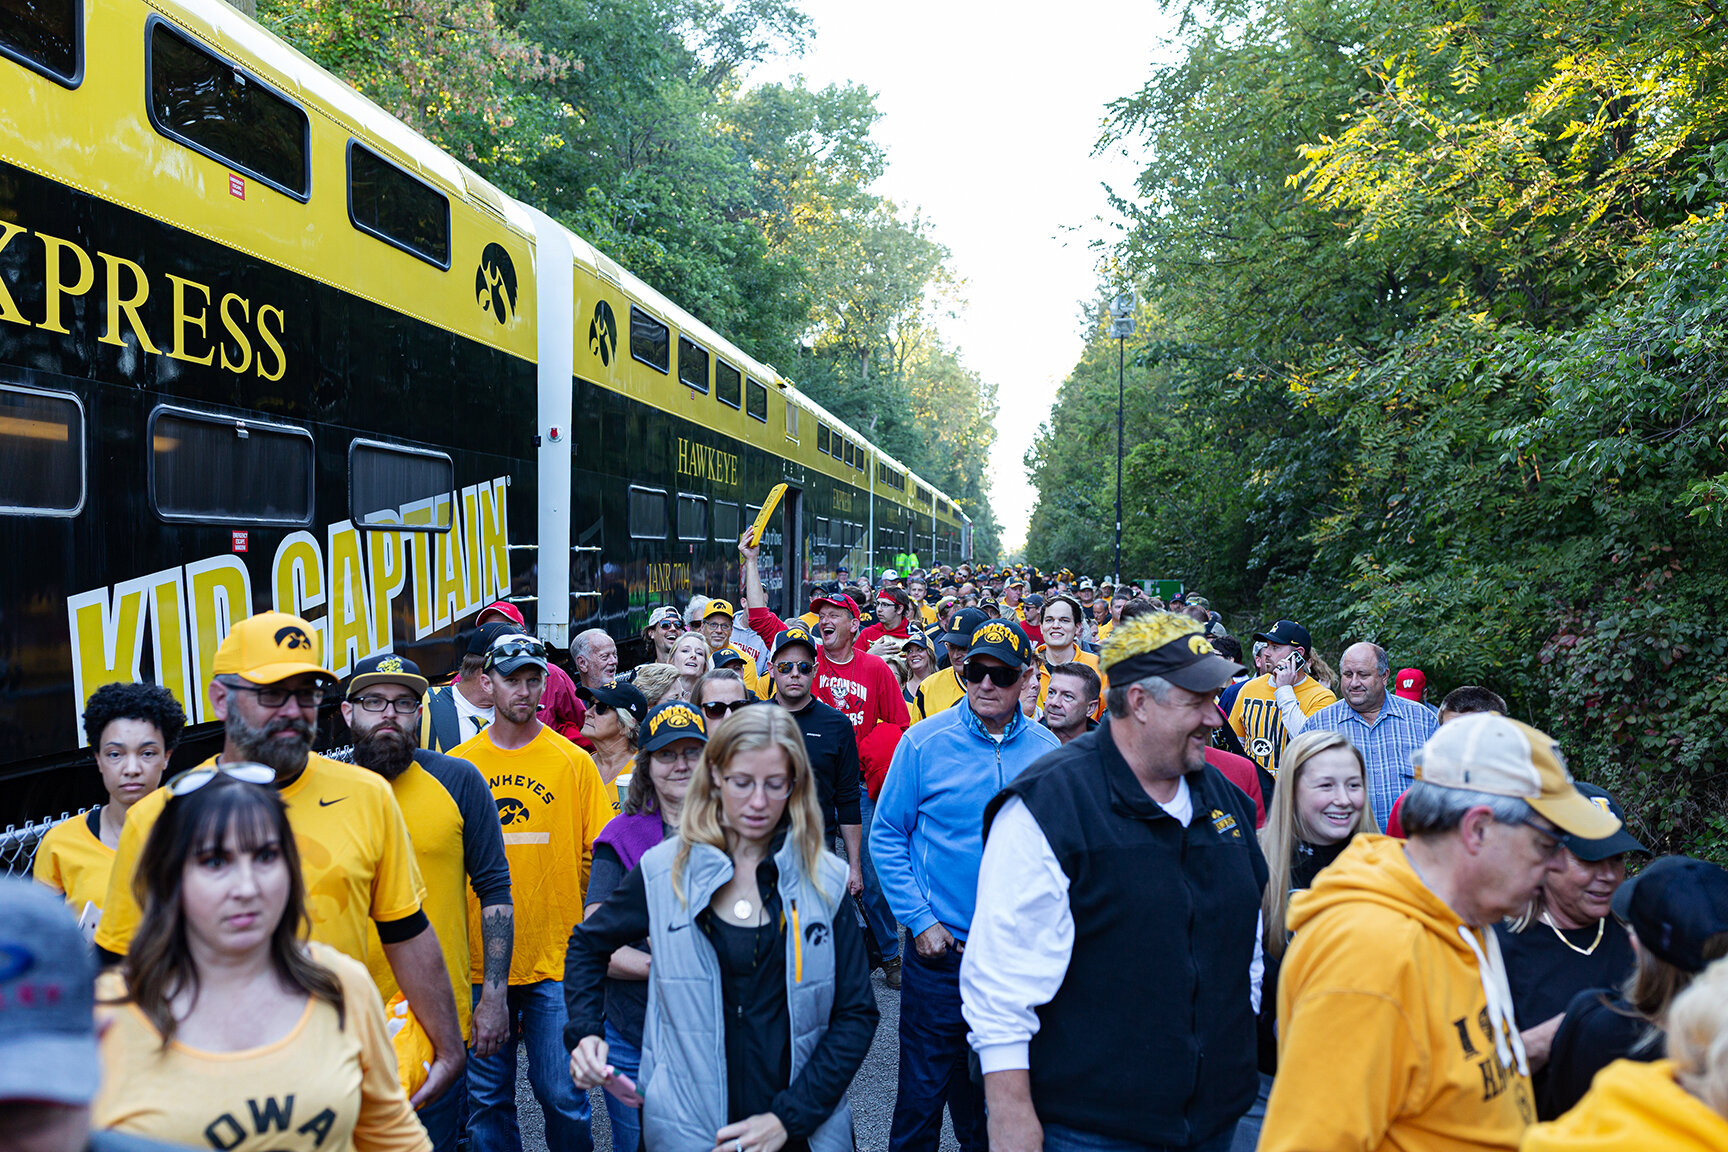  Fans spill out of the Hawkeye Express after its arrival at Kinnick Stadium before the football game against Wisconsin on Saturday, Sept. 22, 2018.  